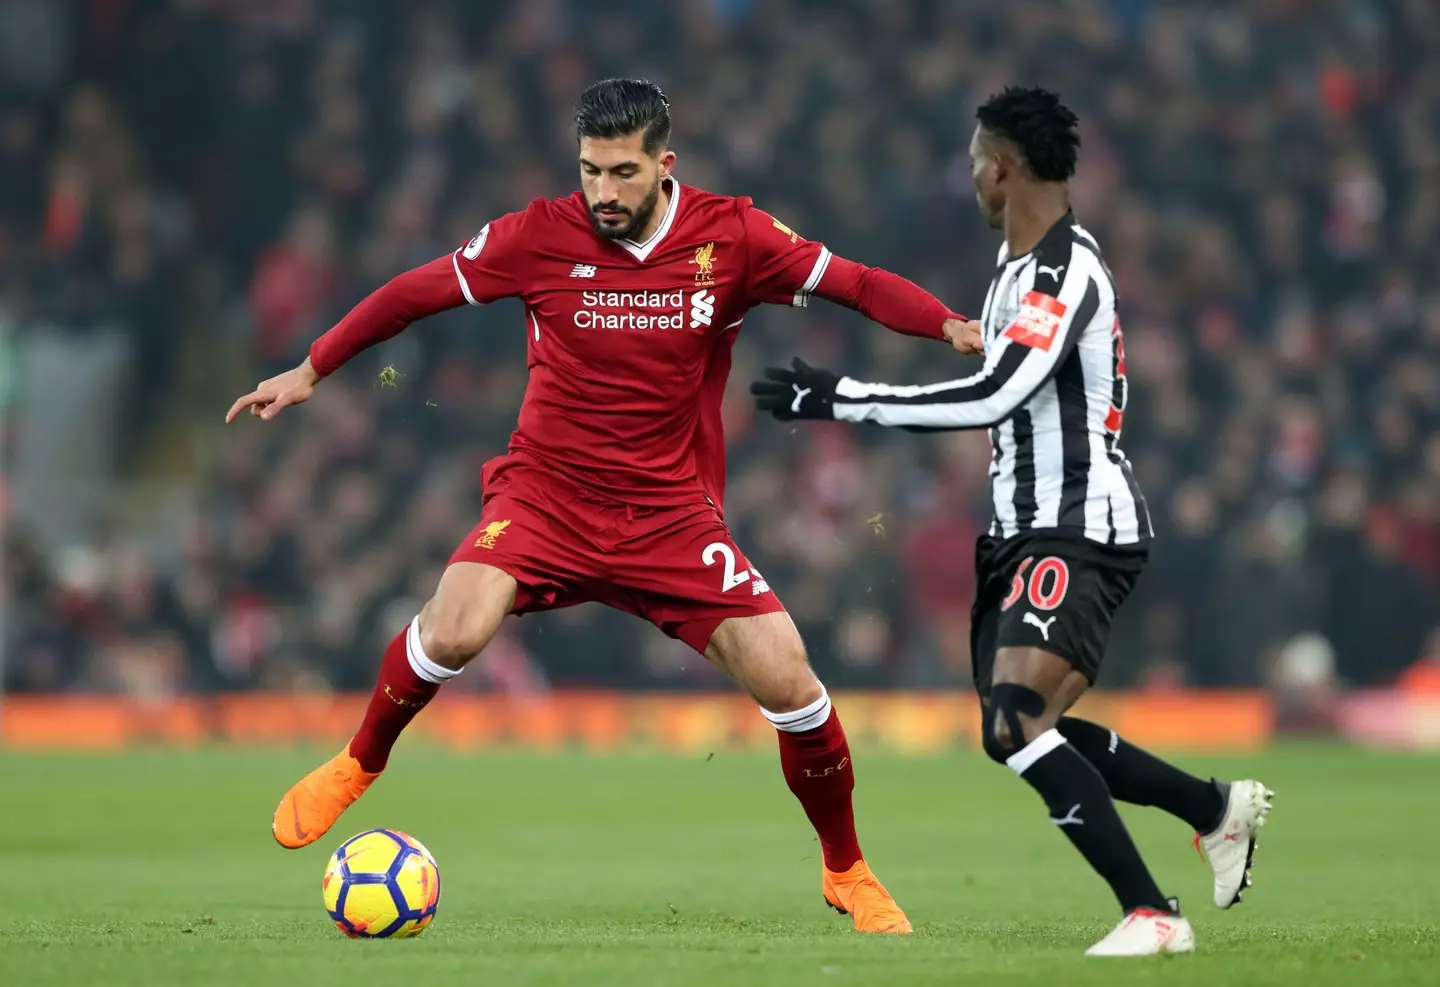 Can left Liverpool to join Juventus on a free transfer in 2018 (Image: Alamy)